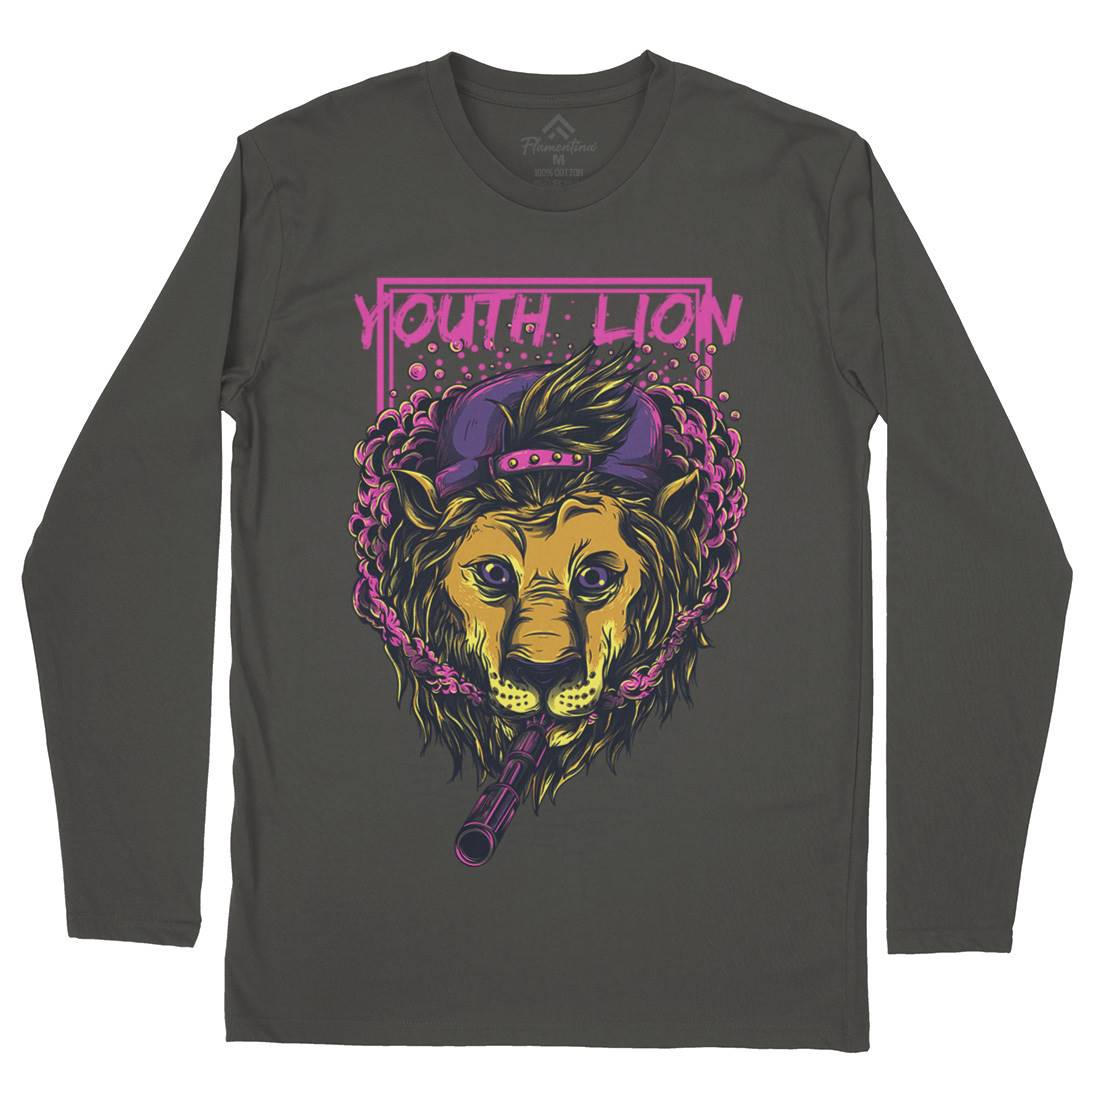 Youth Lion Mens Long Sleeve T-Shirt Animals D893